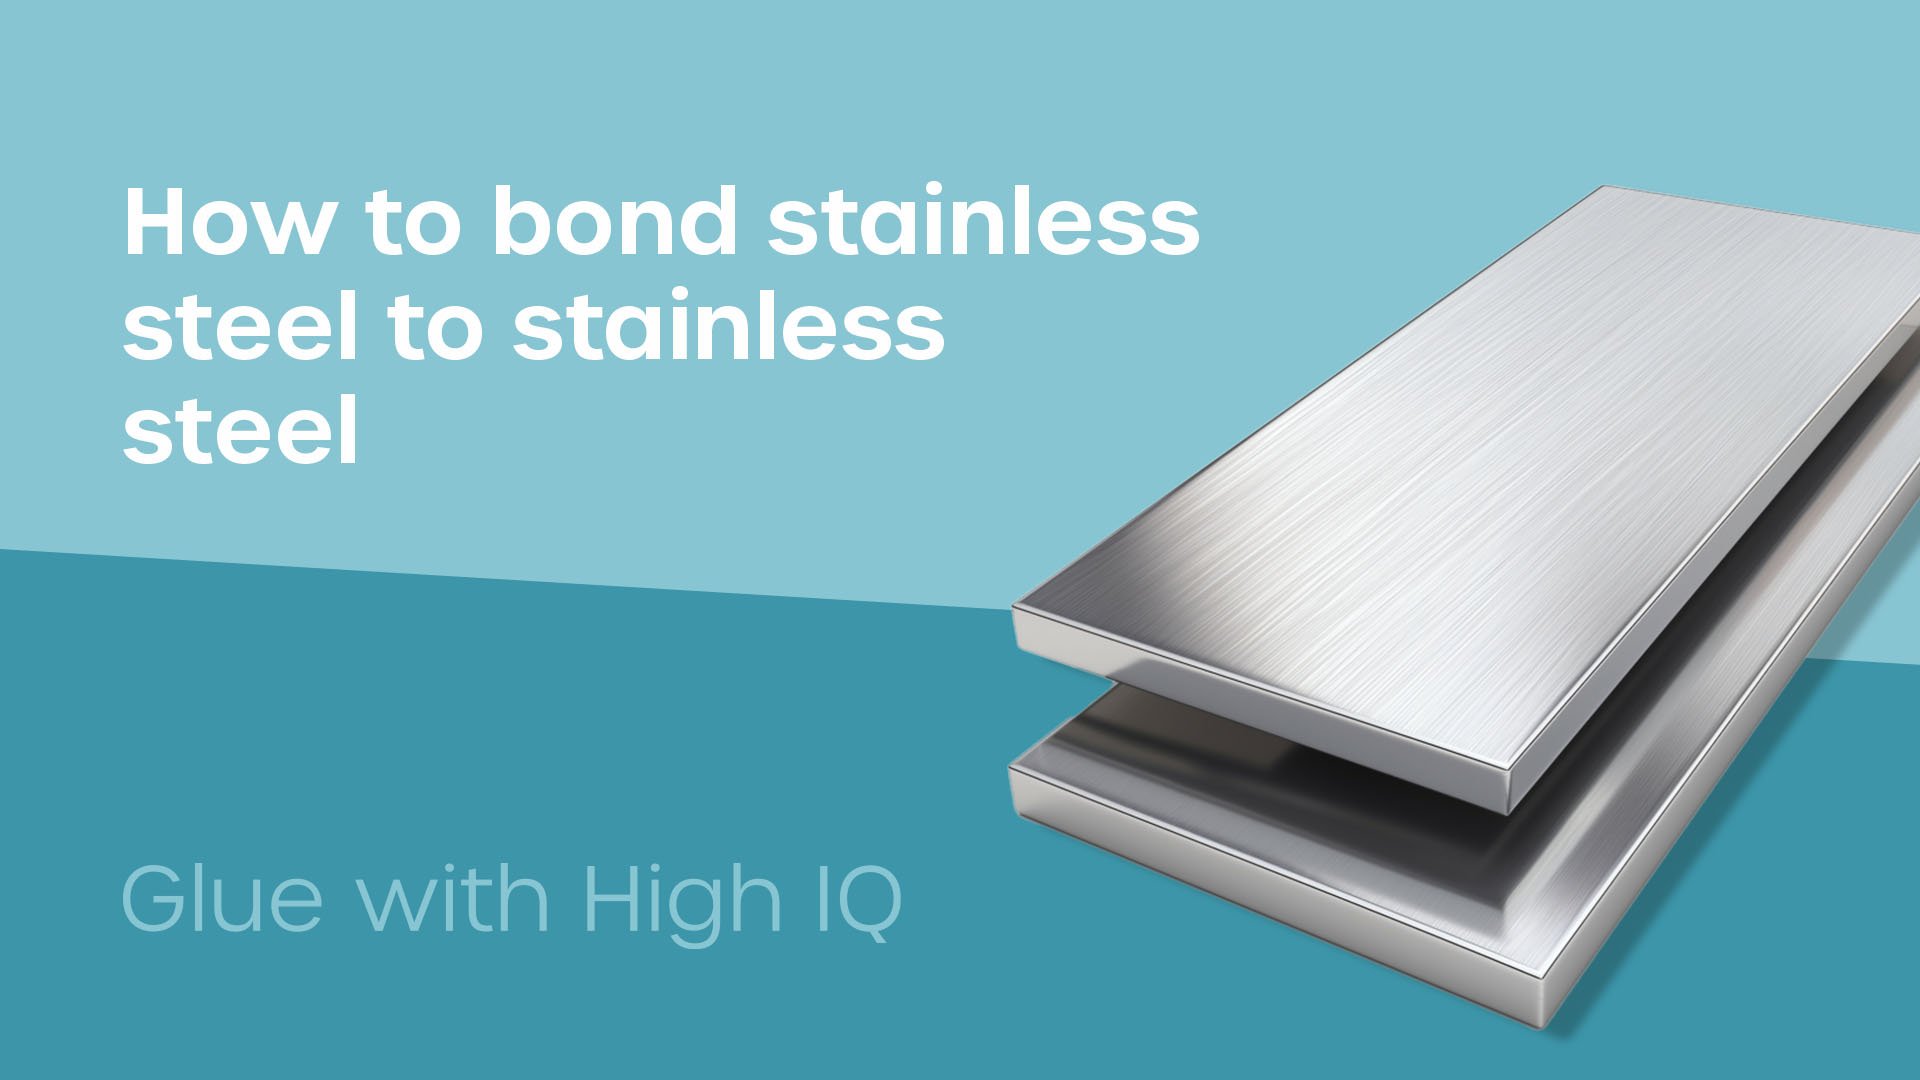 What to consider when bonding stainless steel